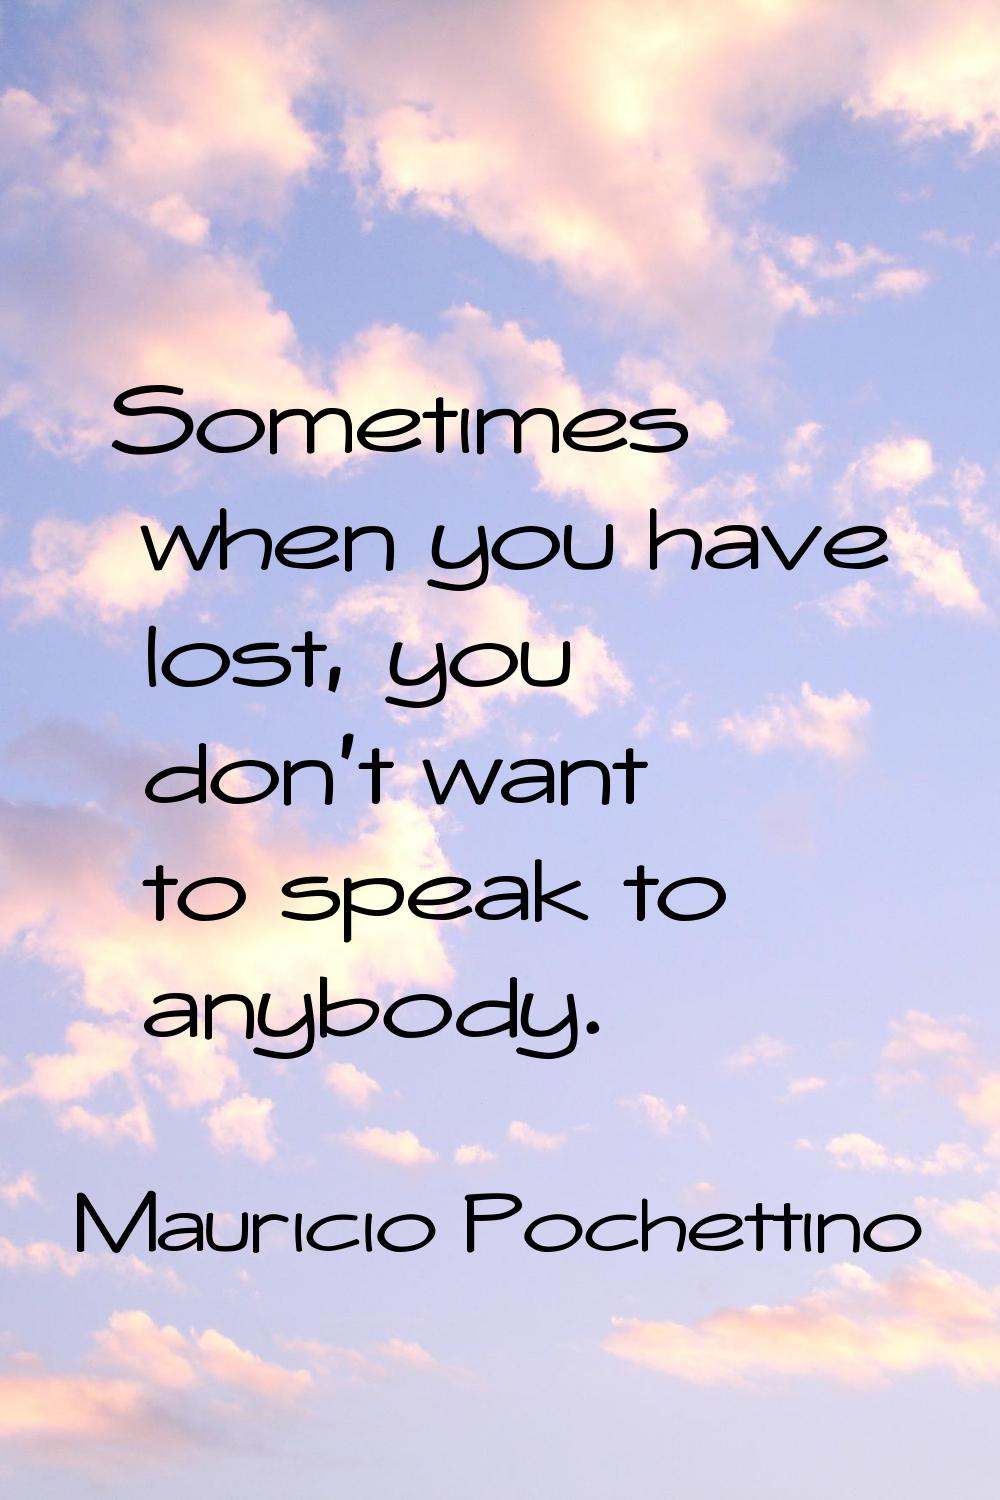 Sometimes when you have lost, you don't want to speak to anybody.